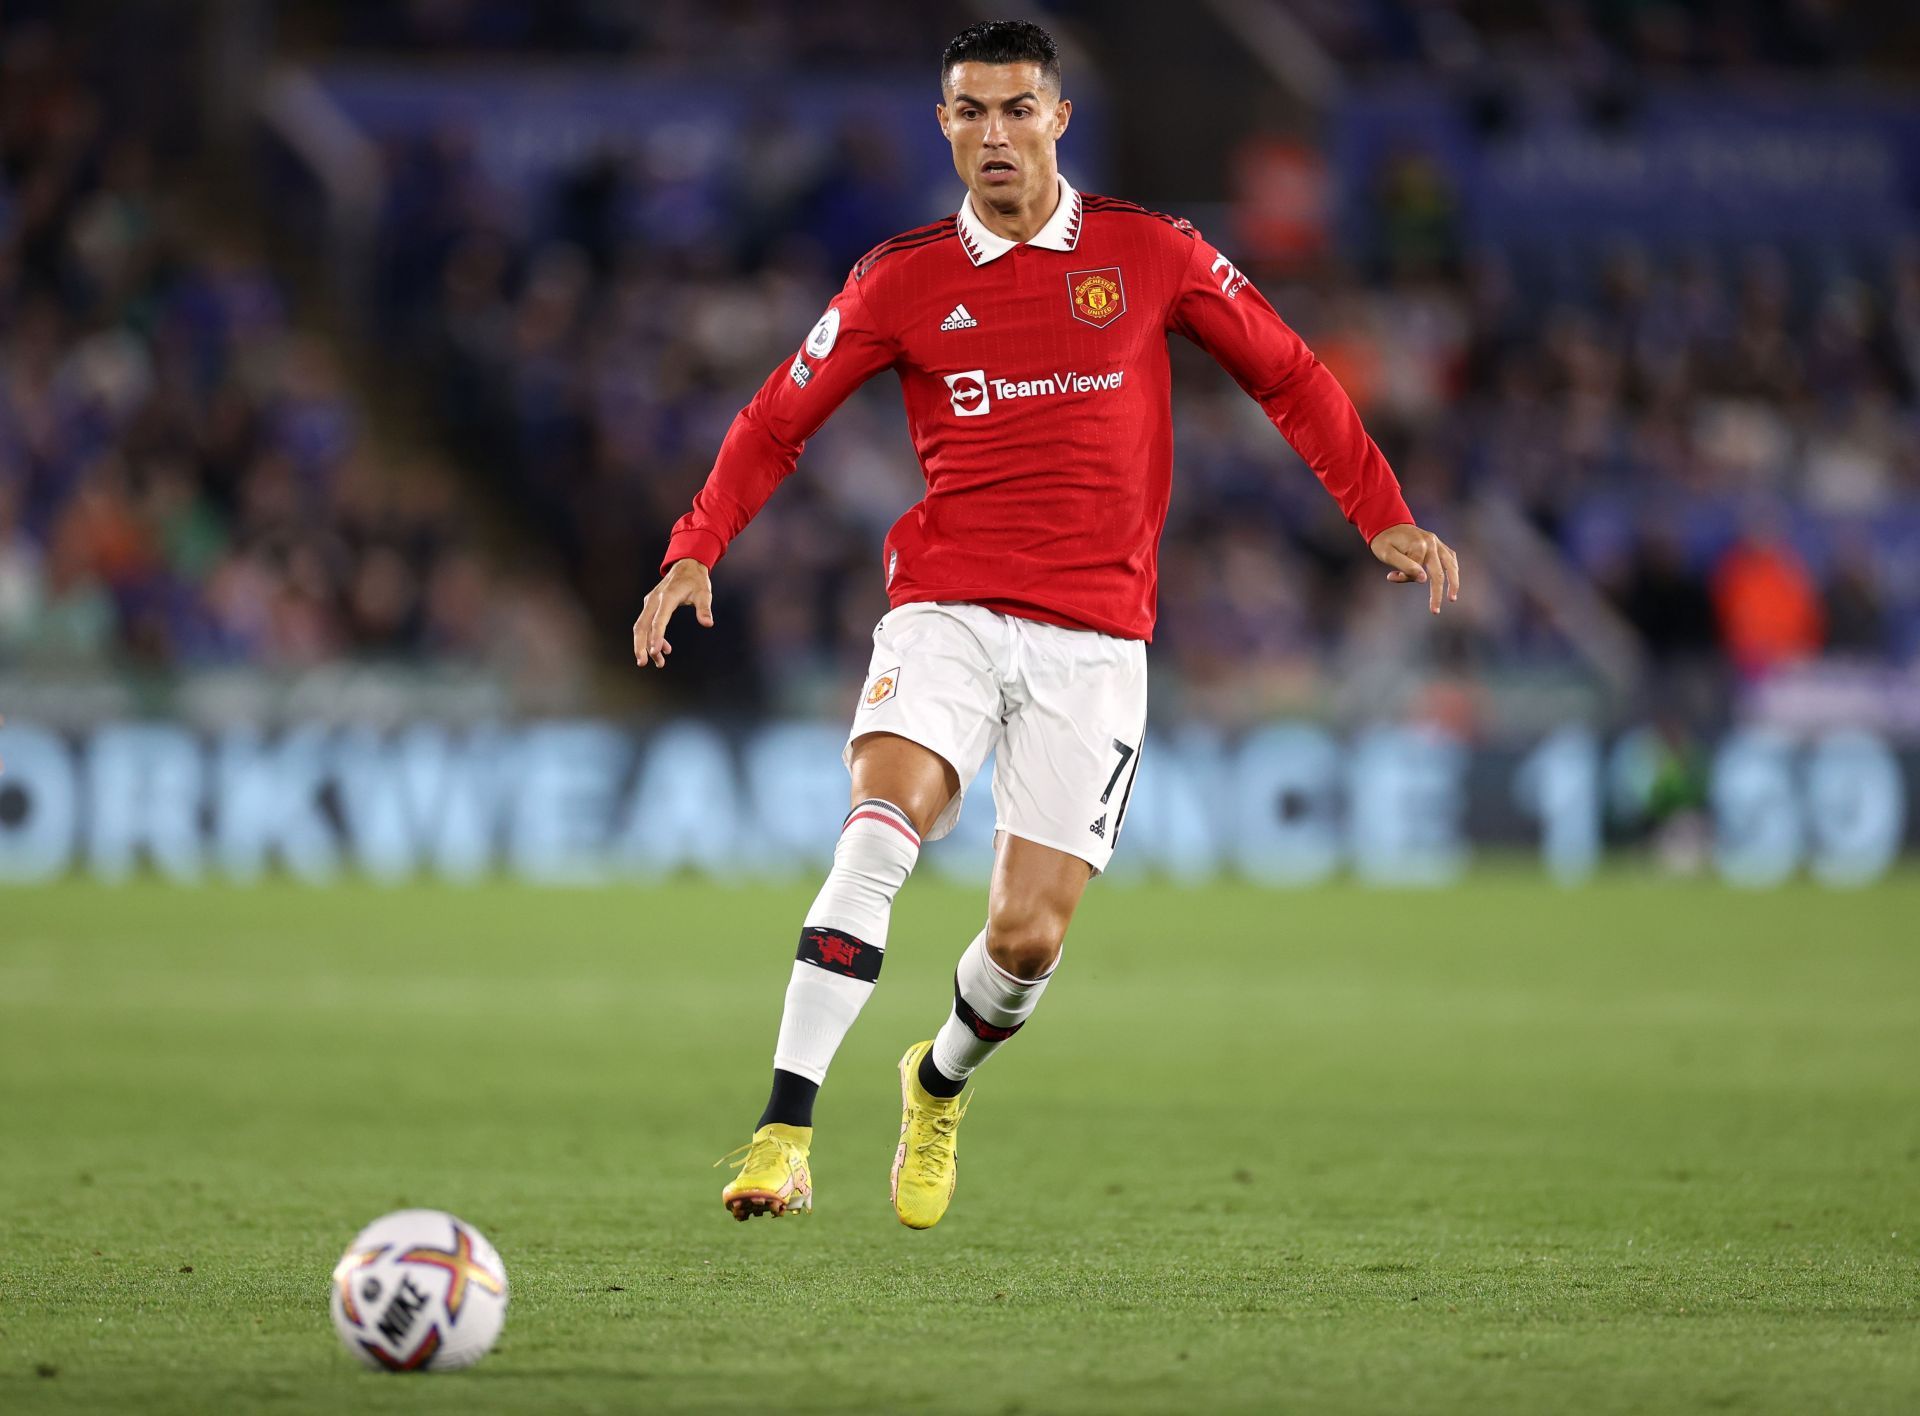 Cristiano Ronaldo is fighting for his place in the team at Old Trafford.